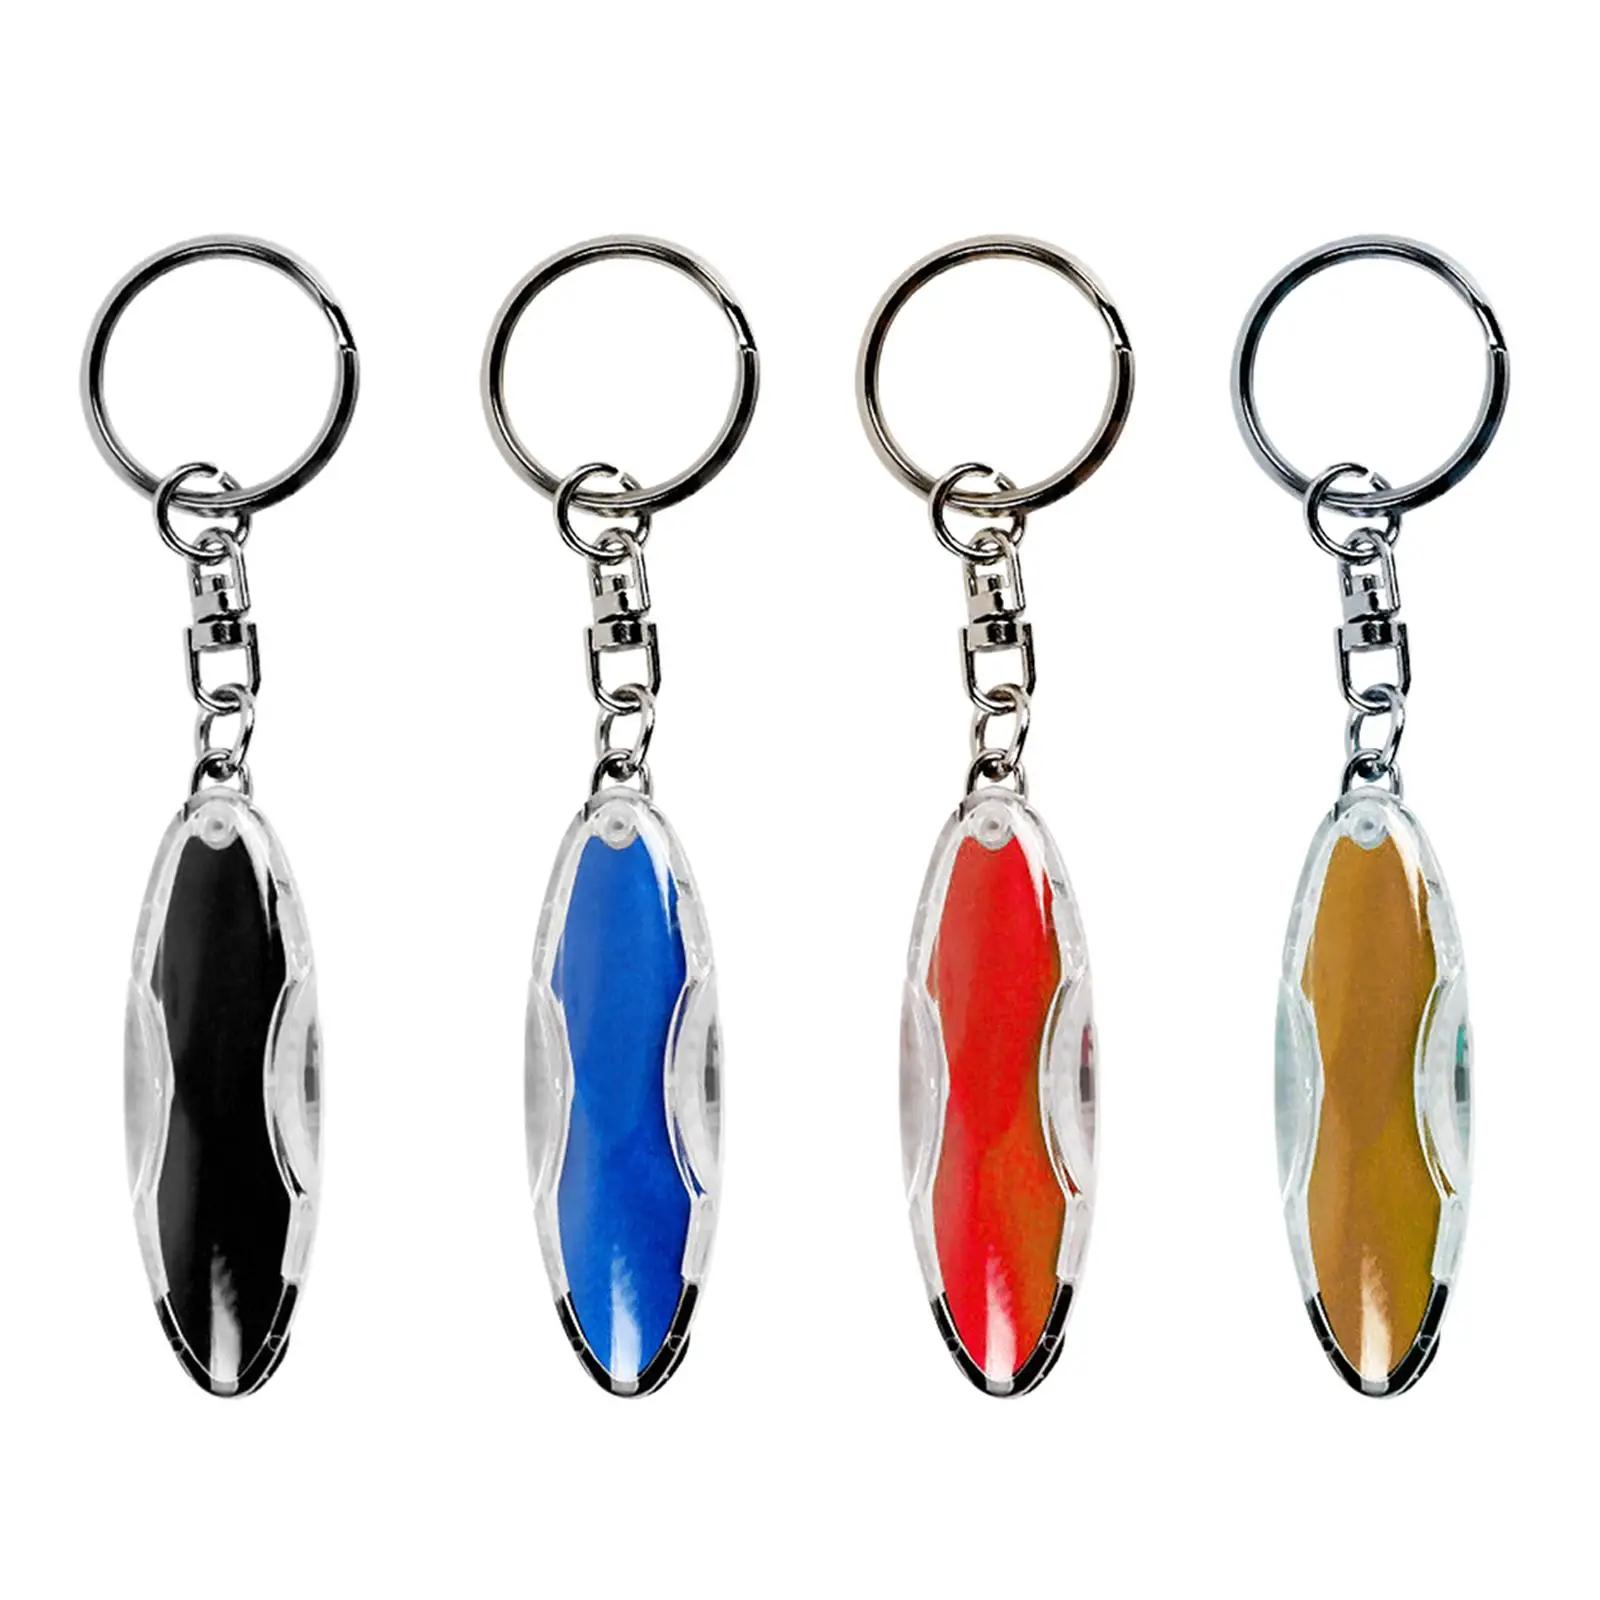 Portable Keychain Keyring Interior Accessory Tool Best Gifts Practical for Back